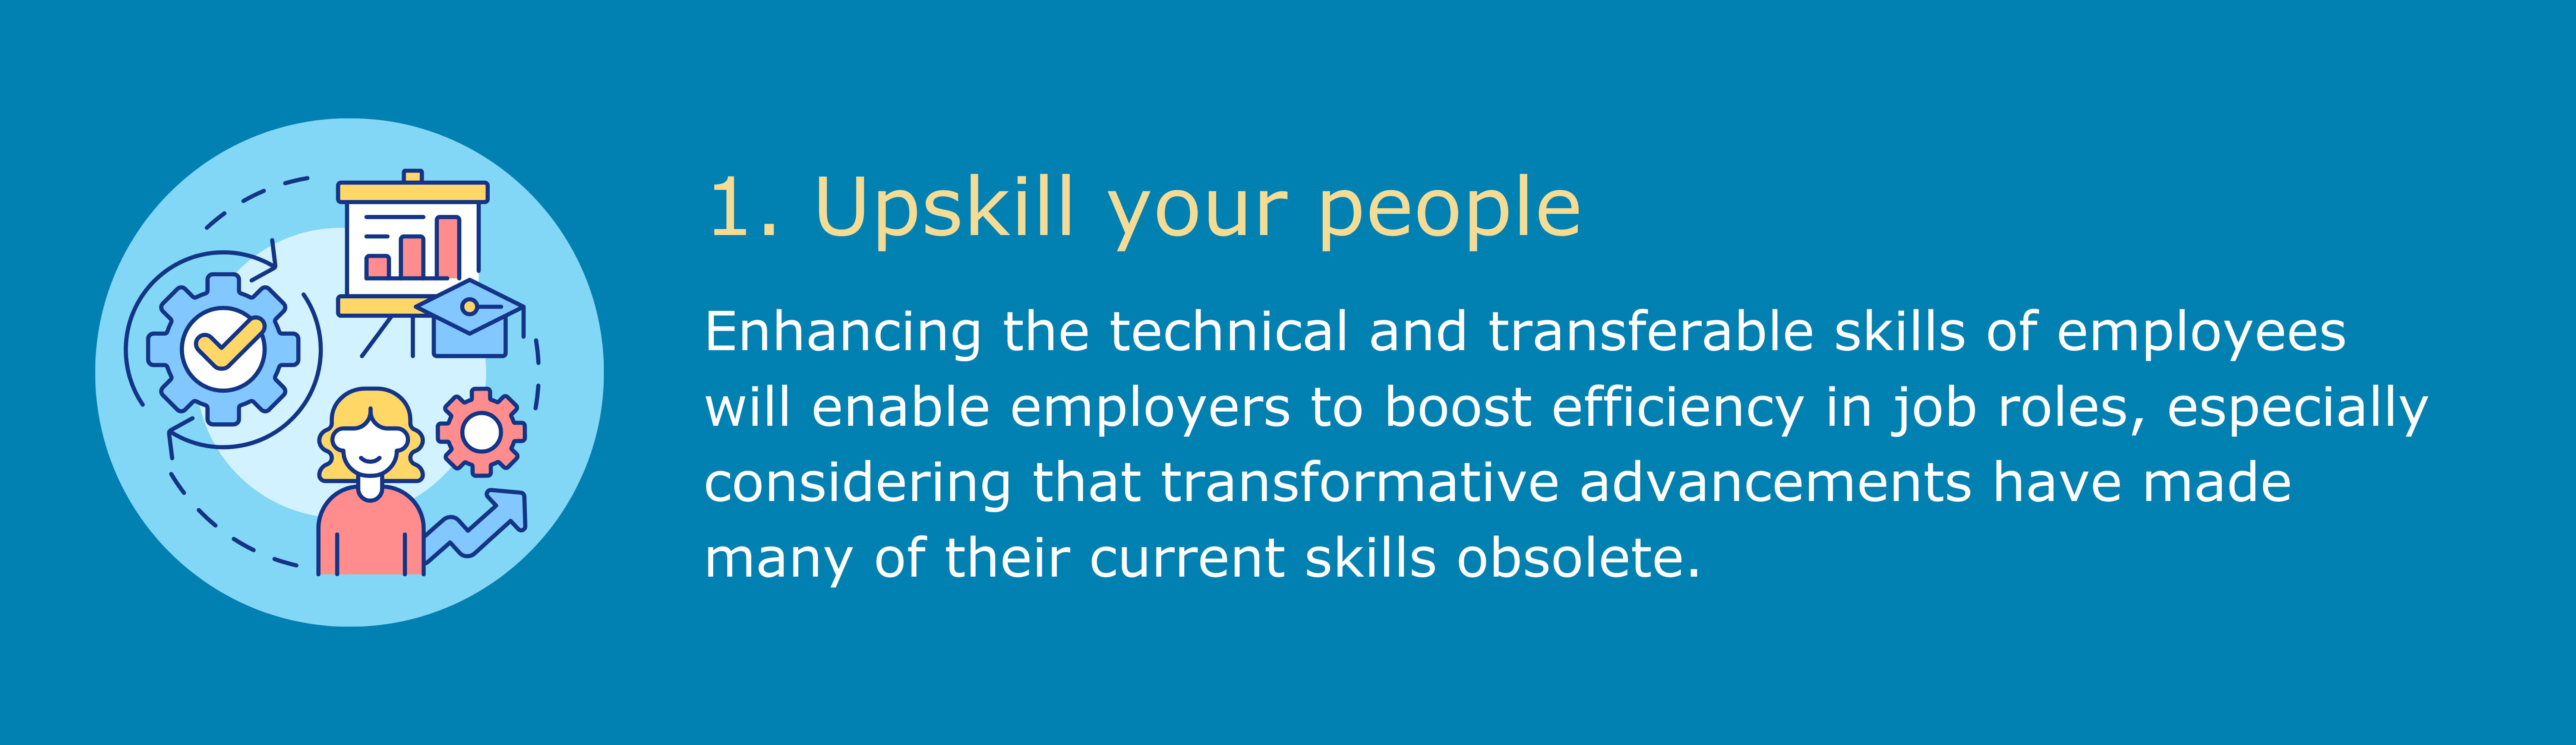 1.	Upskill your people